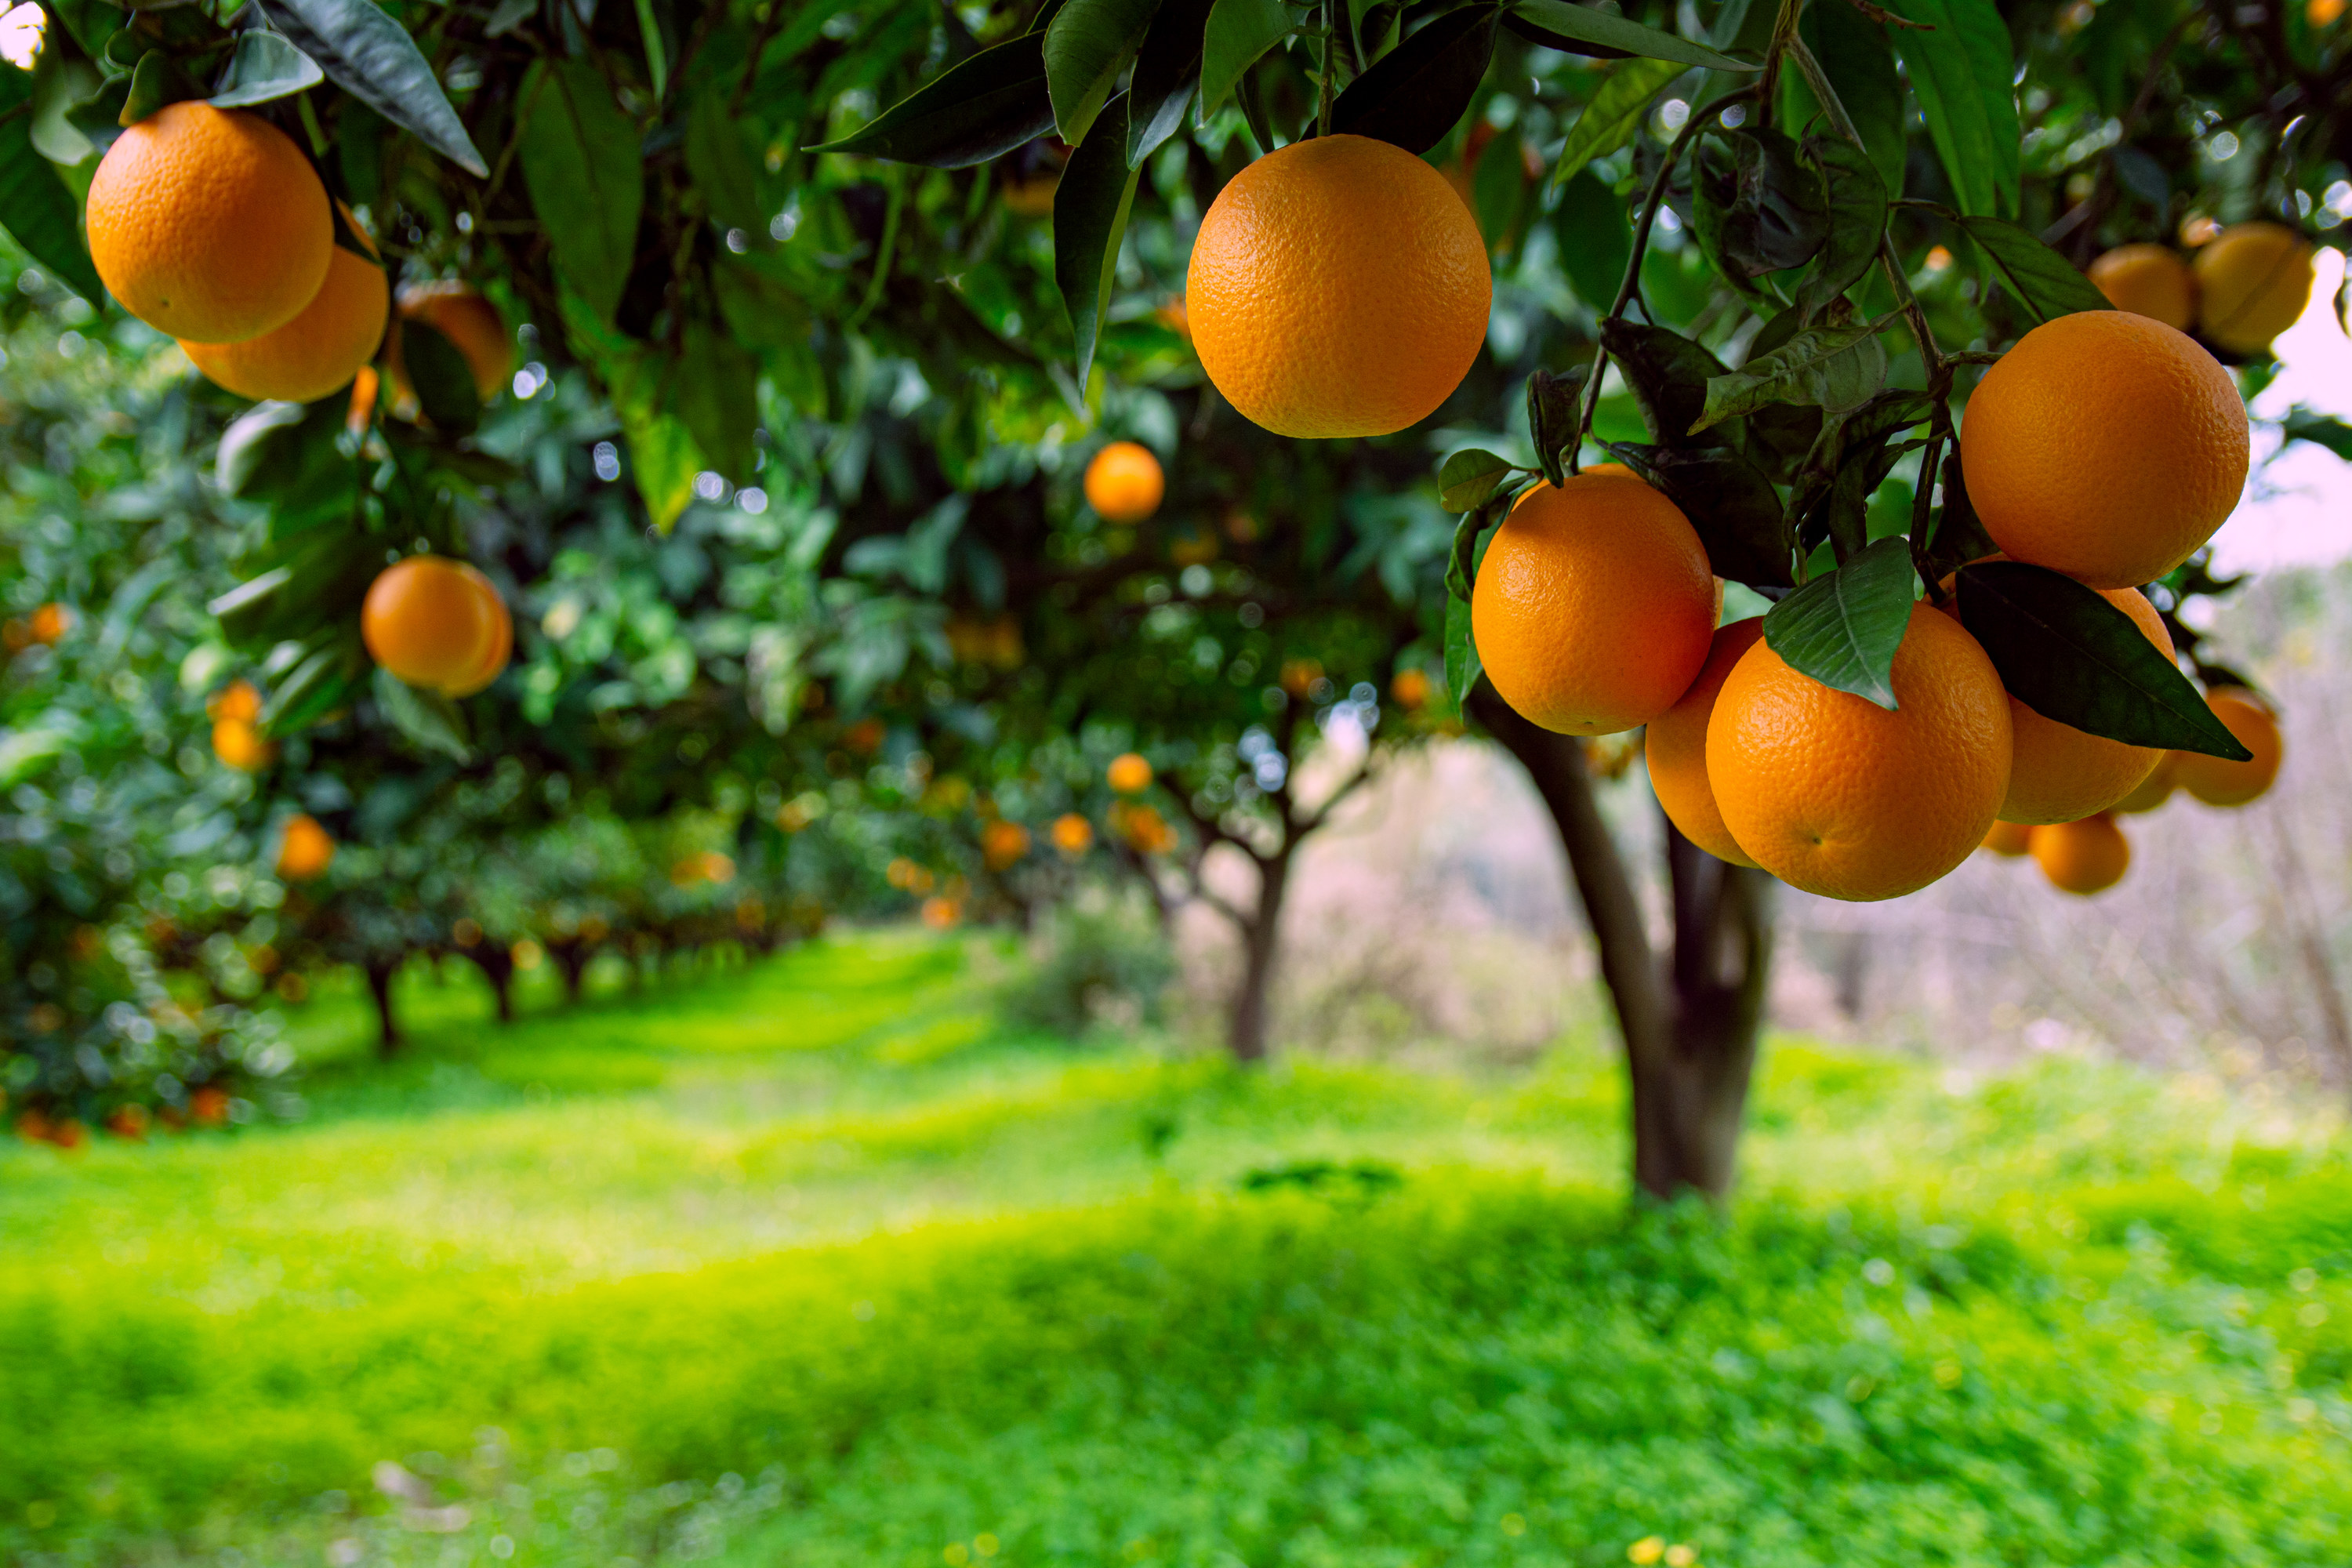 An image of two rows of orange trees with round, bright oranges hanging from the branches